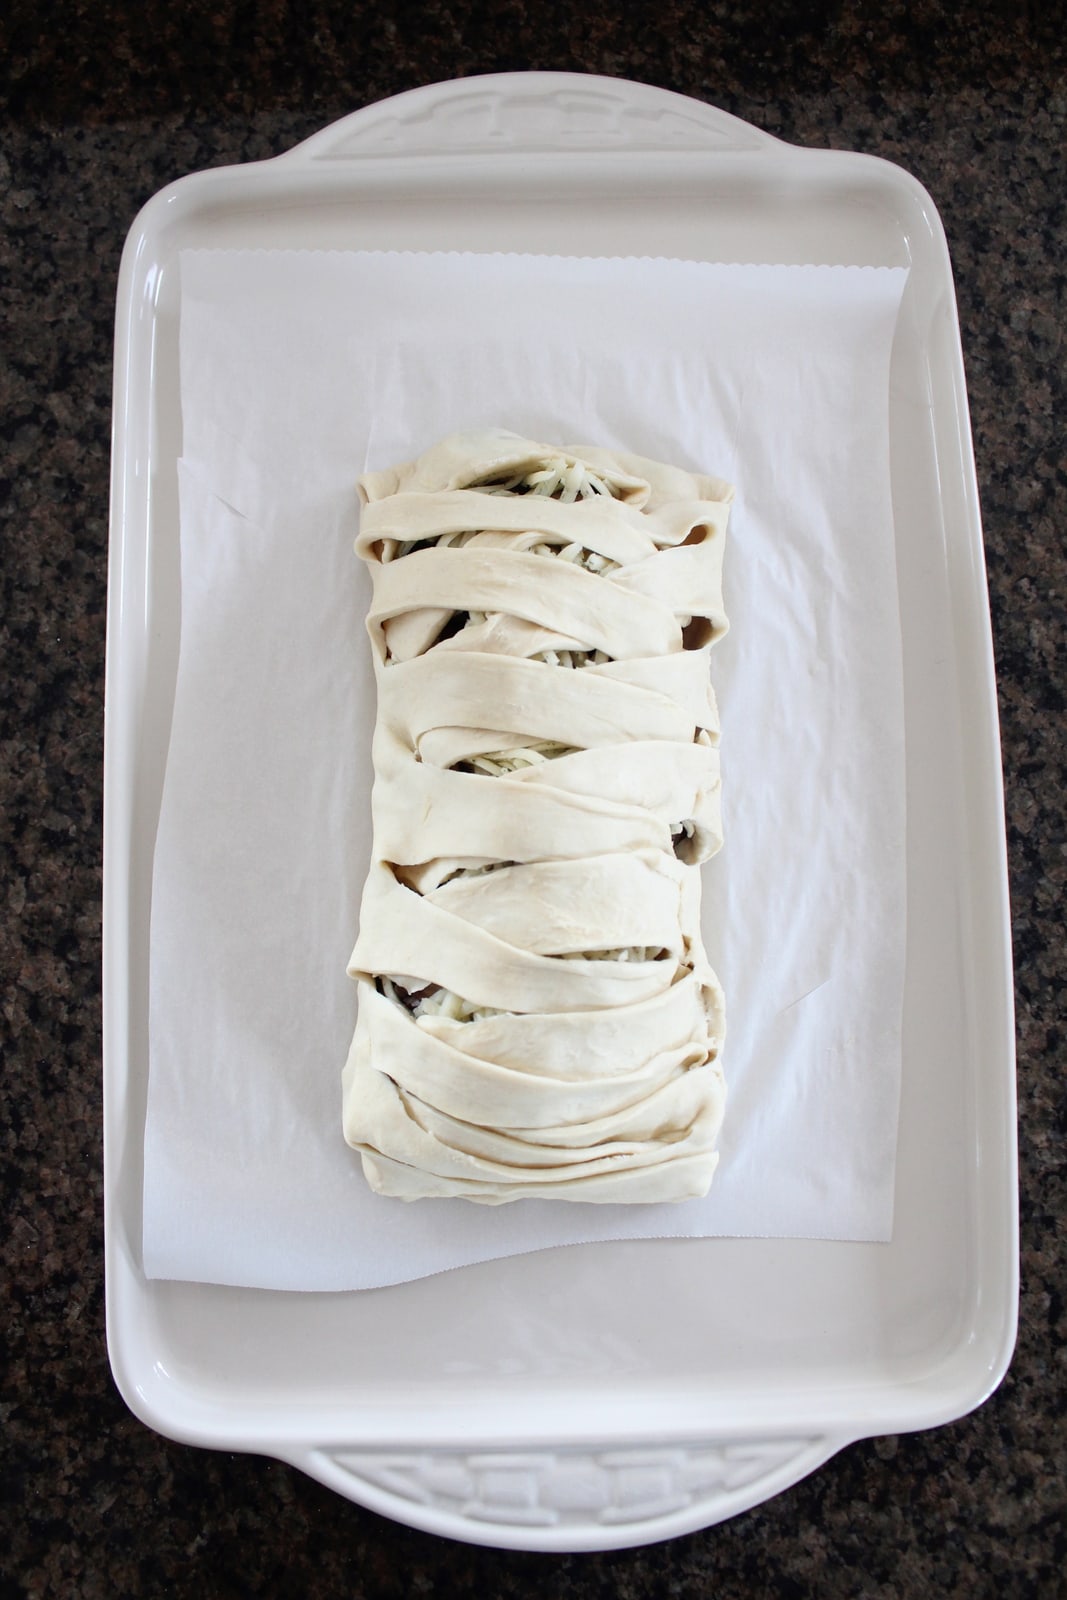 braided puff pastry dough on parchment lined baking sheet